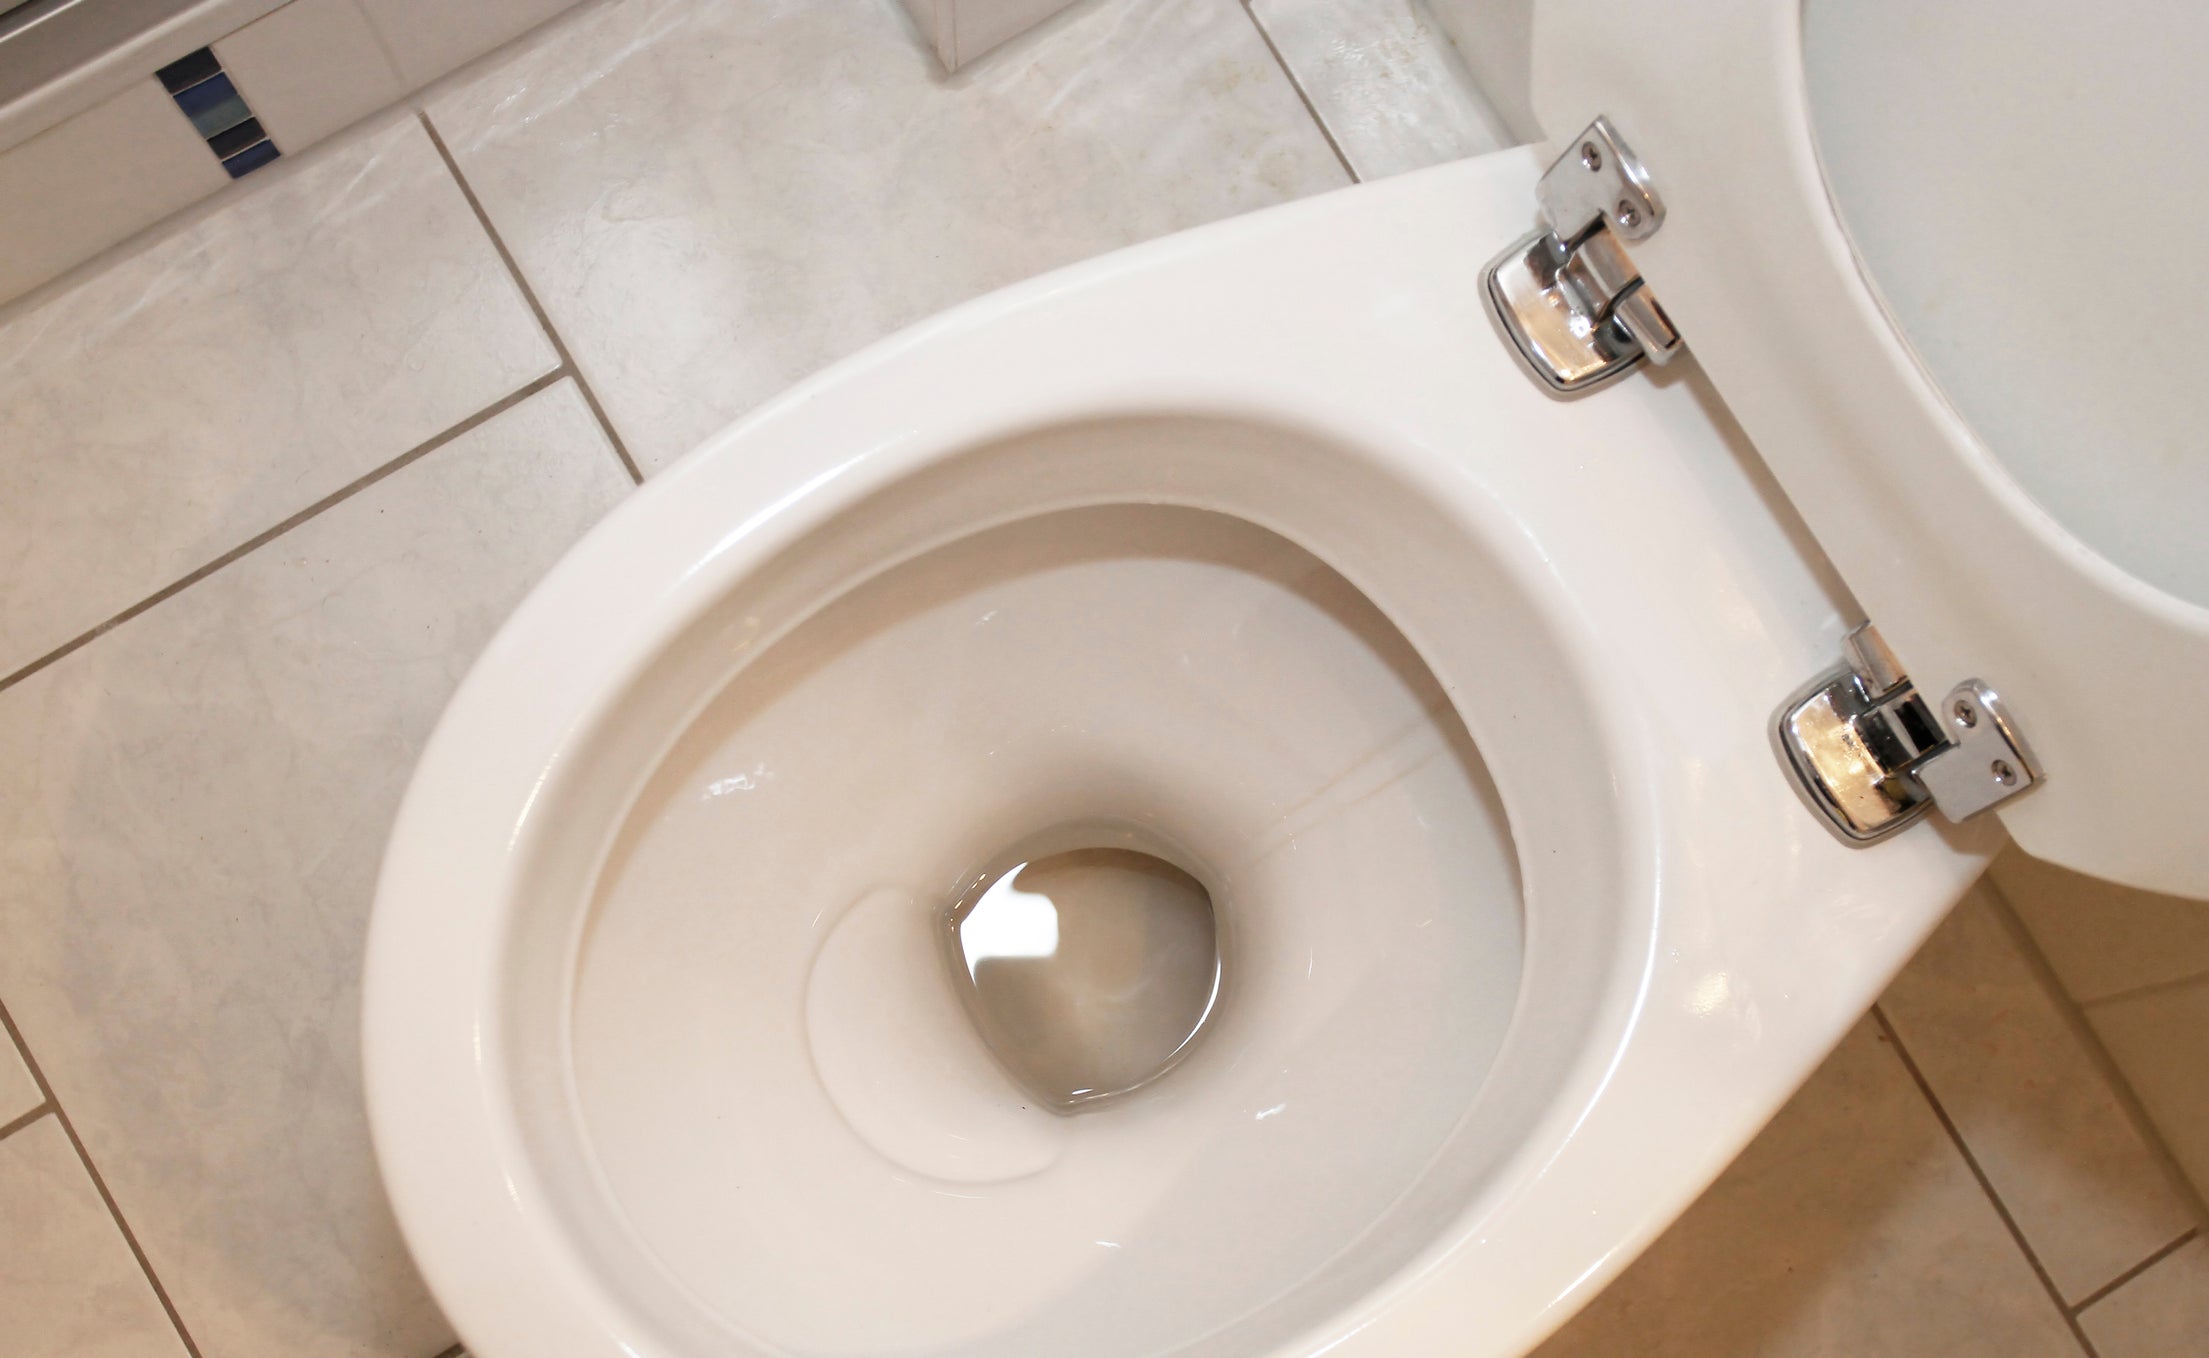 How To Get Rid Of Toilet How to Clean a Toilet with Bleach | Clorox®